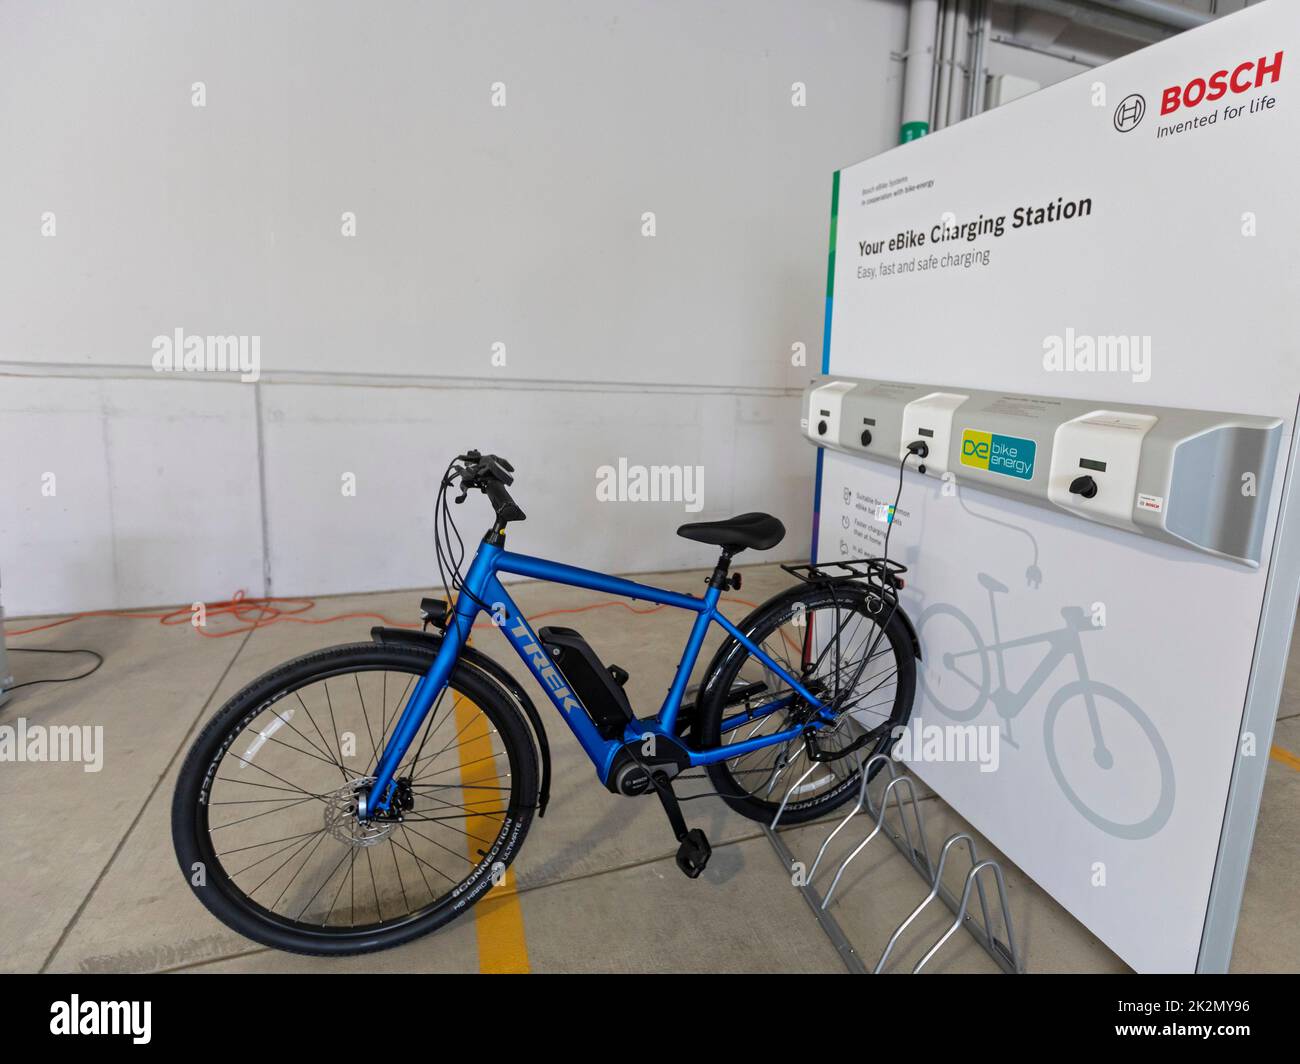 Detroit, Michigan - The Detroit Smart Parking Lab, a research center operated by the American Center for Mobility in a parking garage. The center test Stock Photo